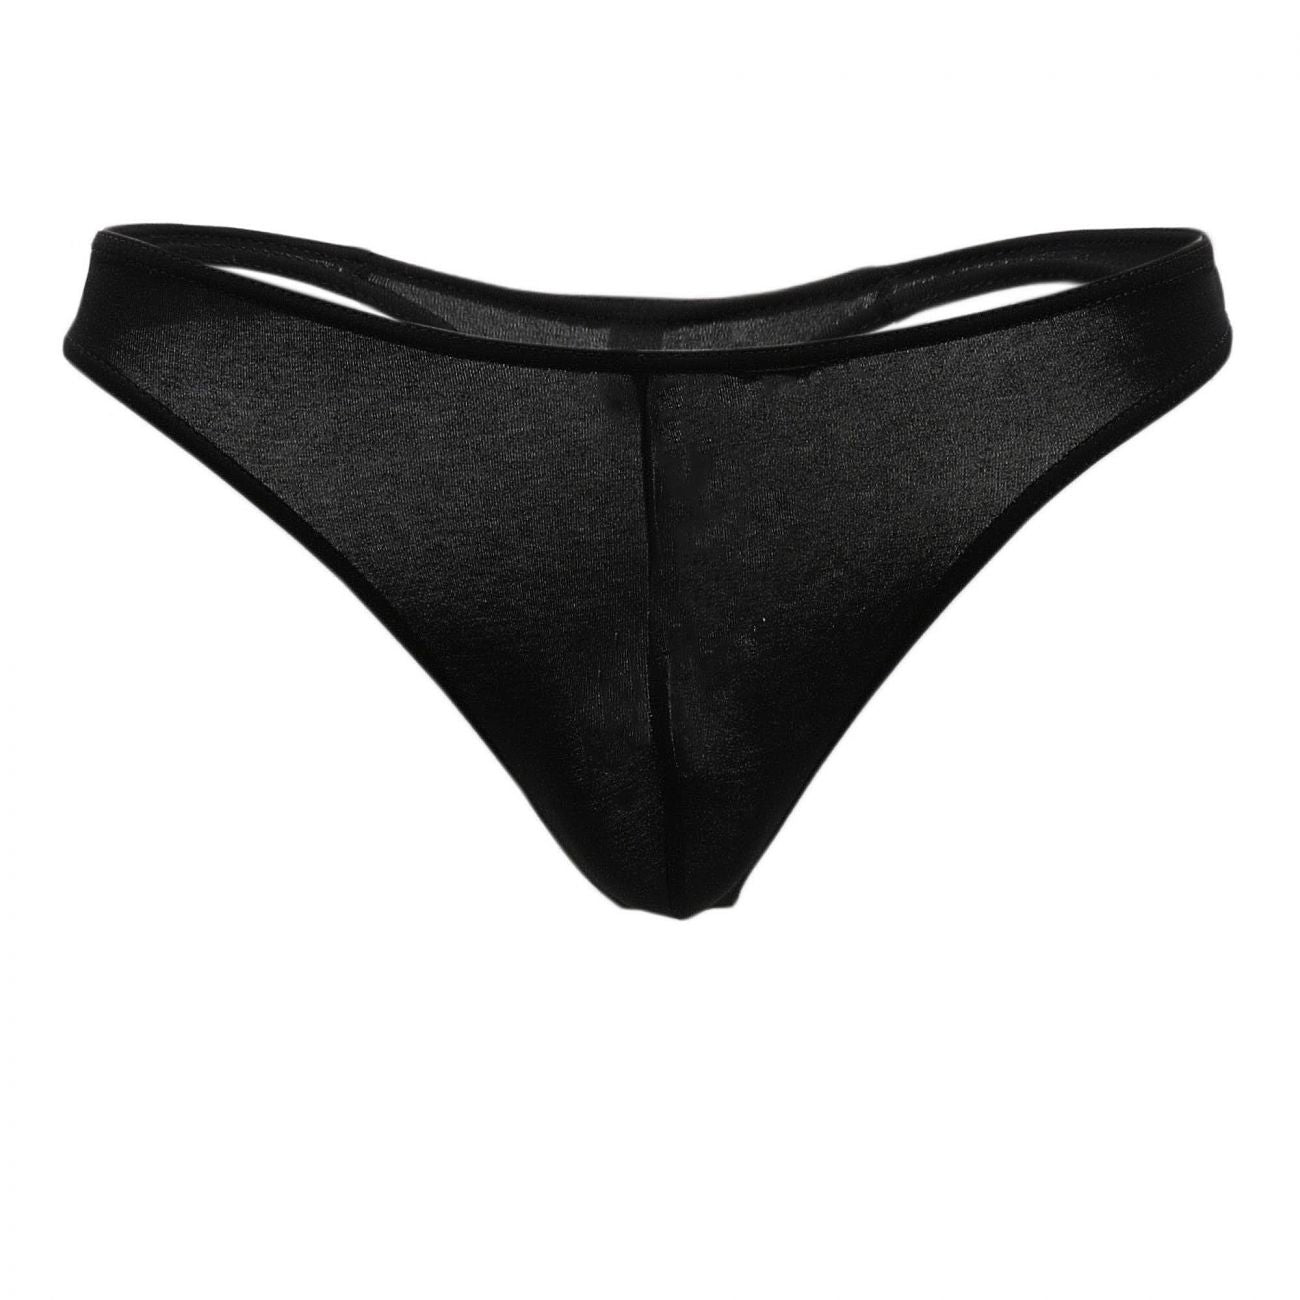 under-yours - Hang-loose Thong - Doreanse - Mens Underwear